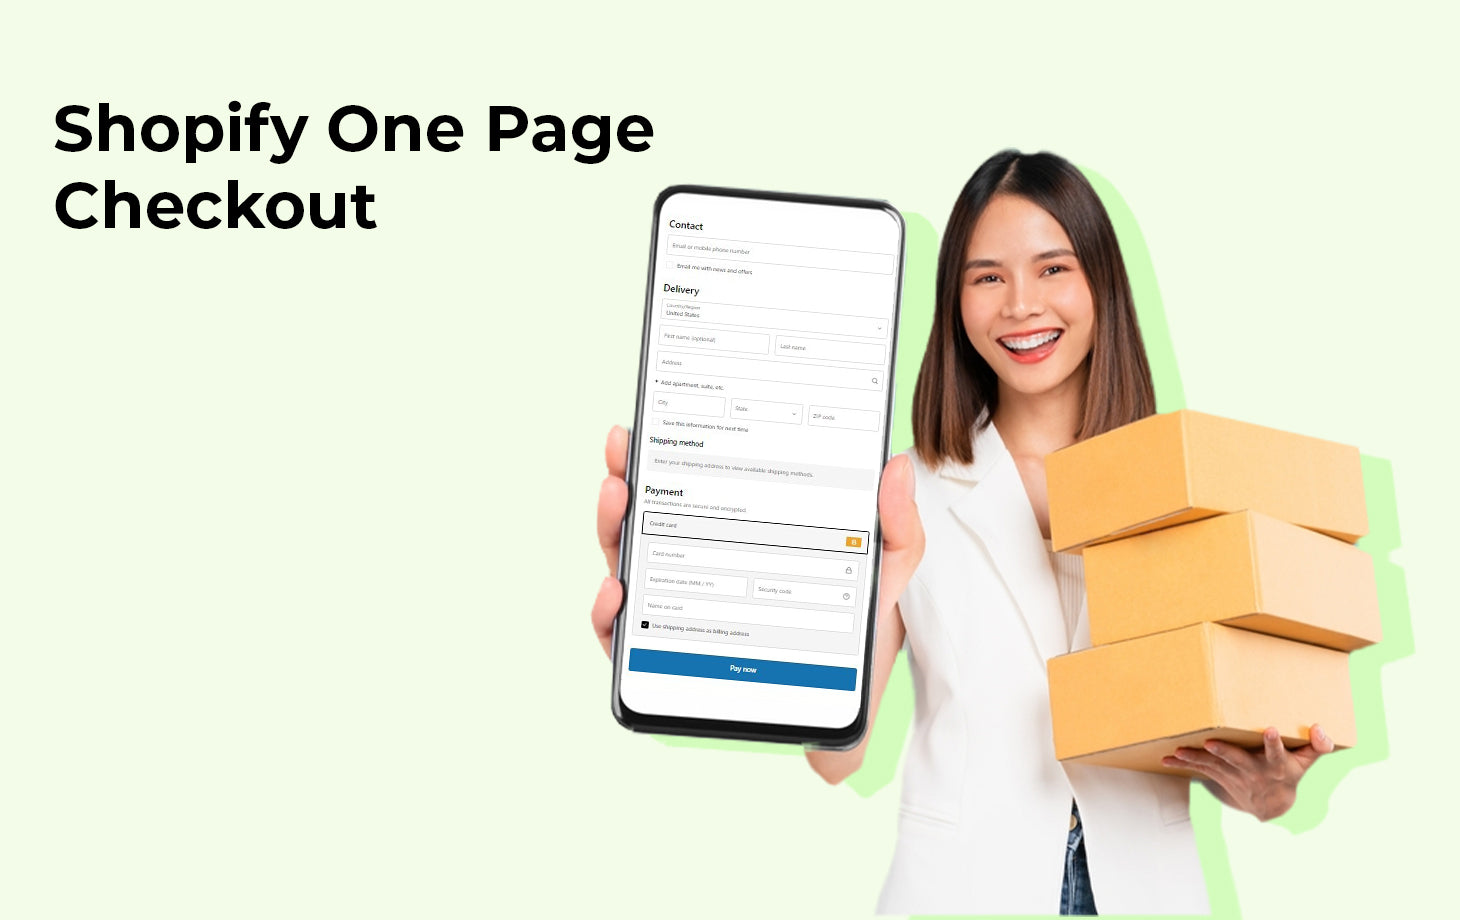 Shopify One Page Checkout - All You Should Know-Boost Your Sales-Shopify One Page Checkout